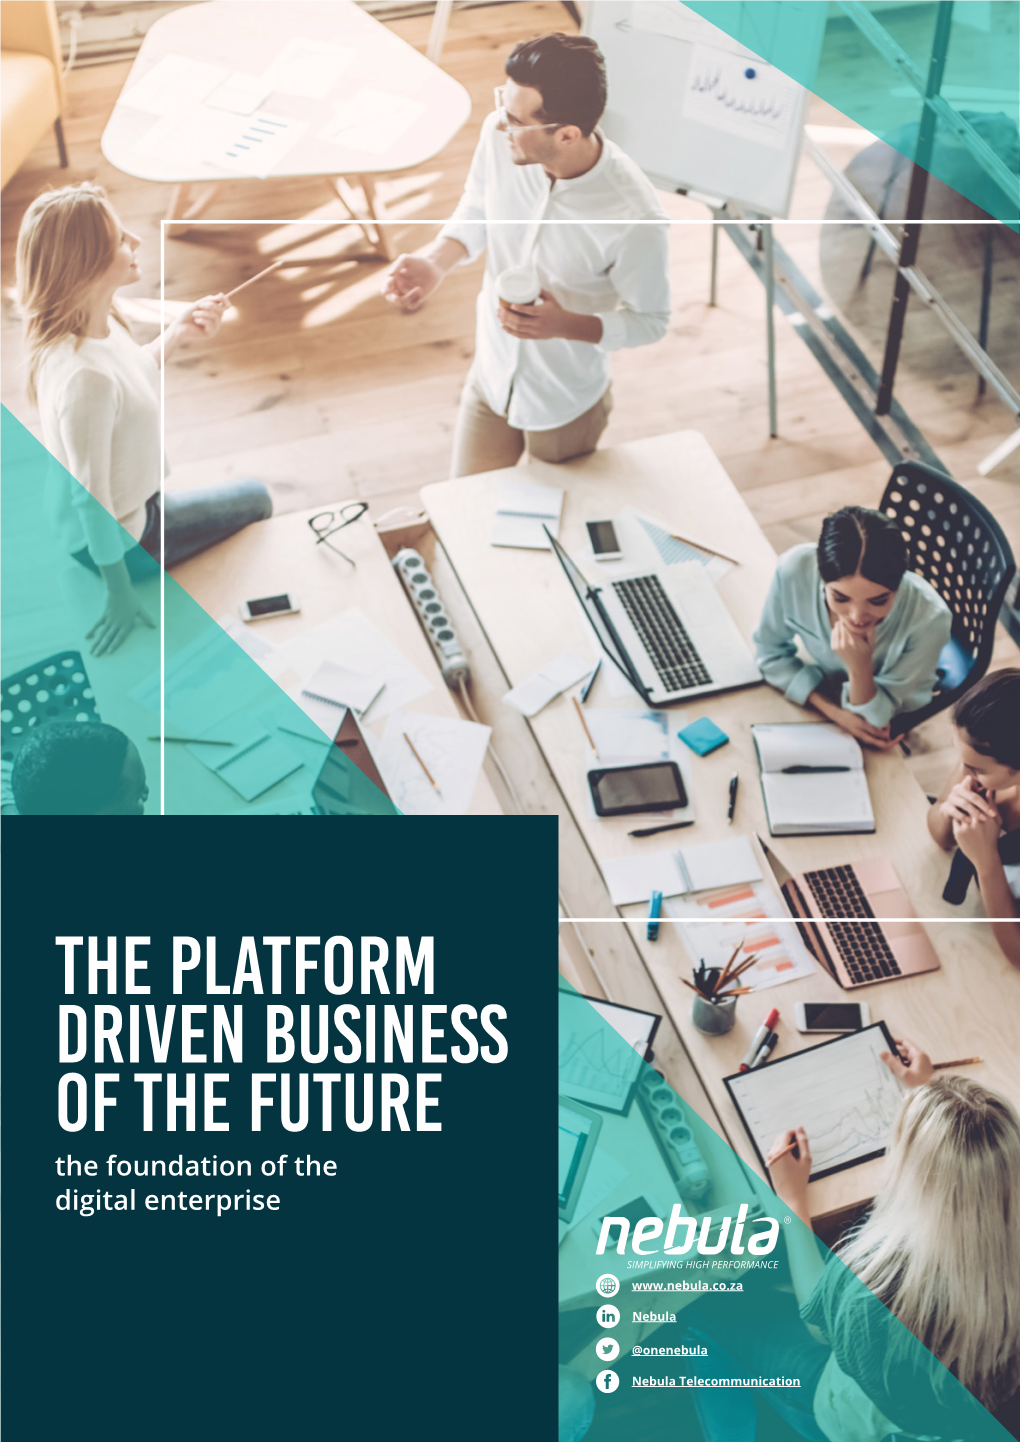 The Platform Driven Business of the Future the Foundation of the Digital Enterprise